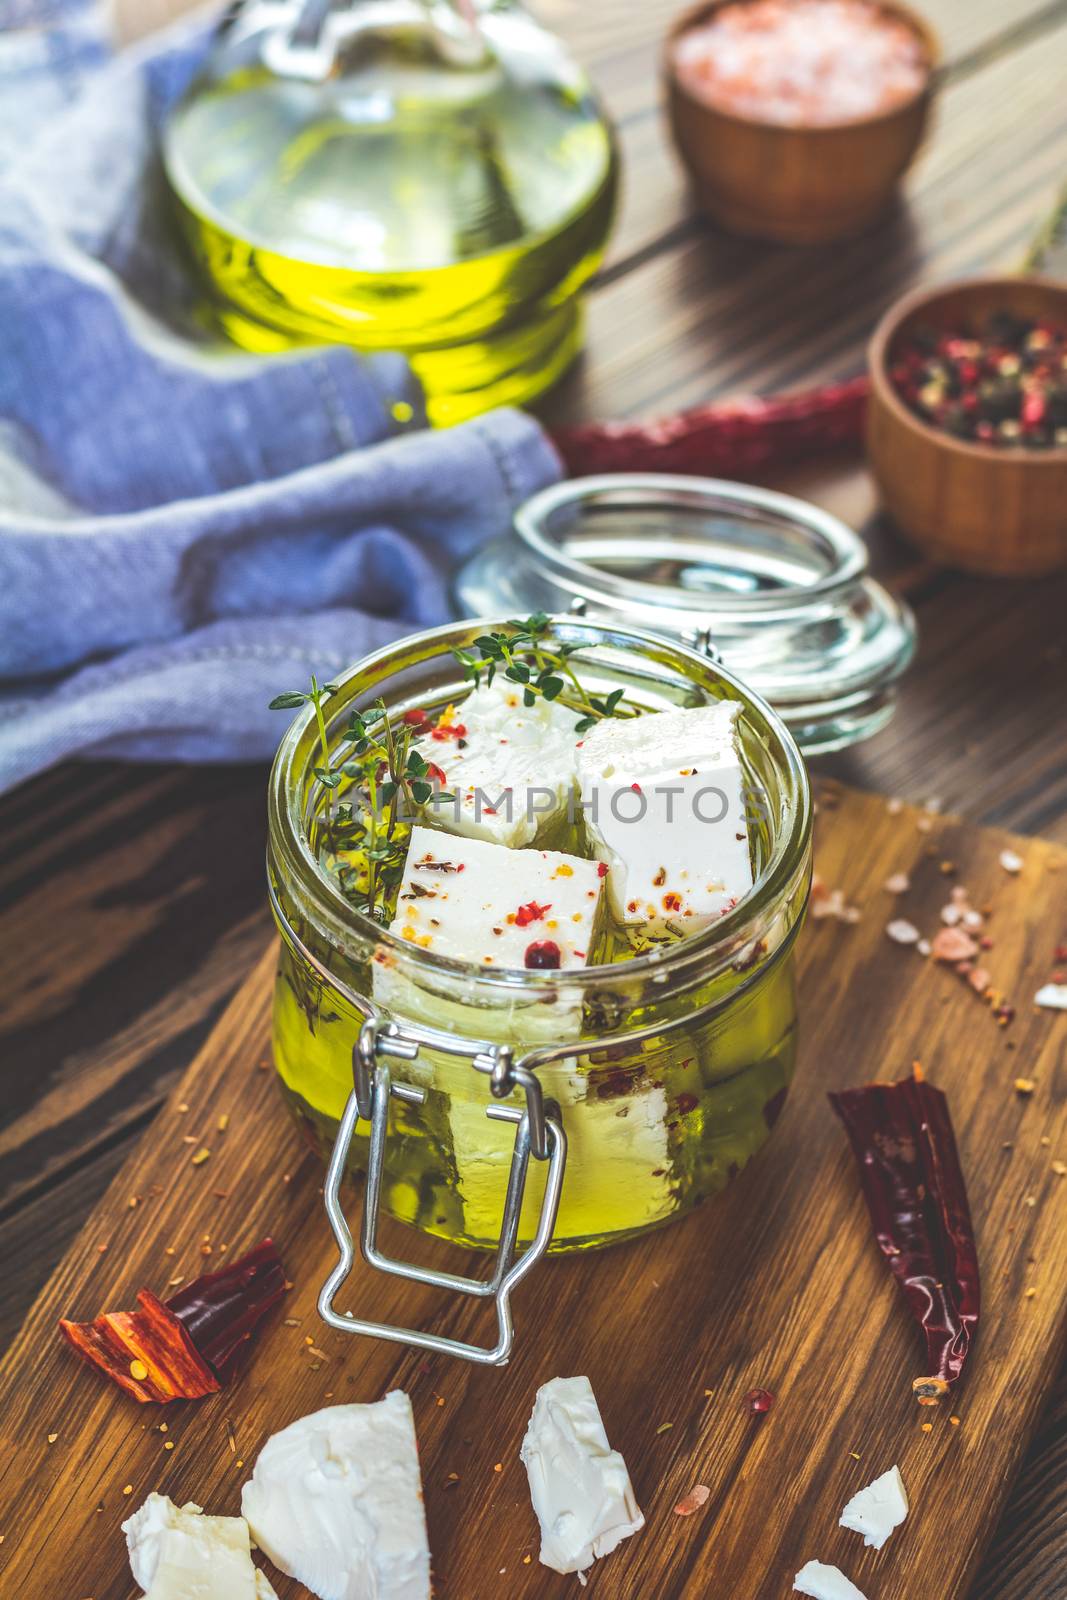 Feta cheese marinated in olive oil with spices by ArtSvitlyna